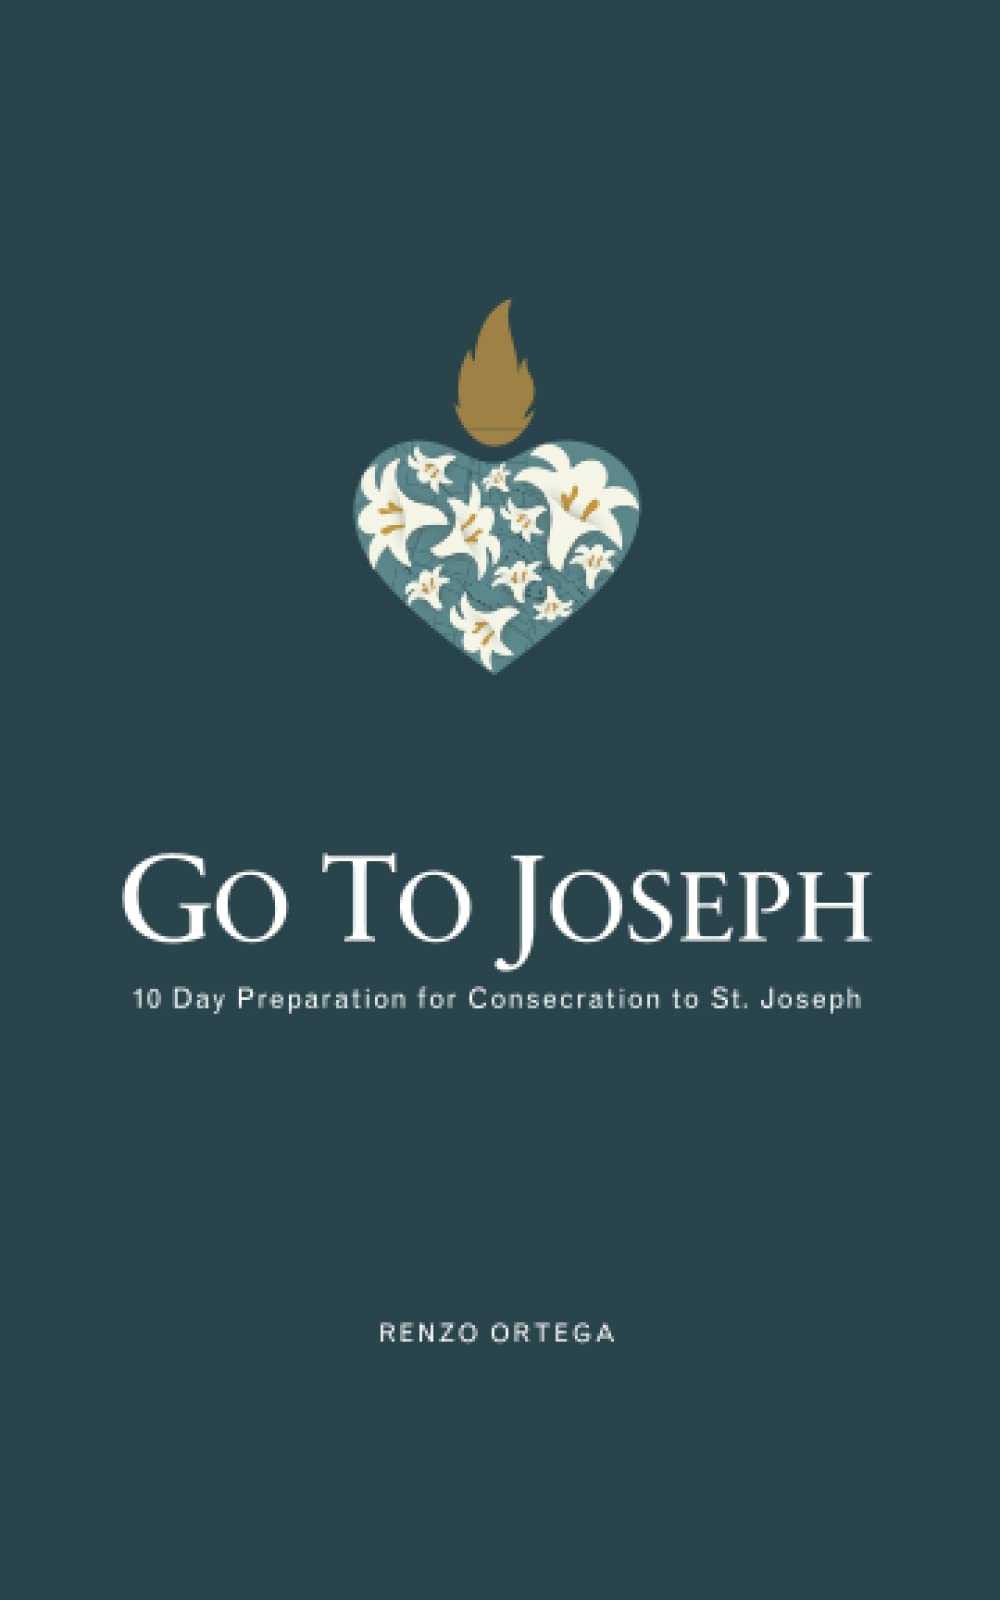 Consecration to St. Joseph is a transformative devotion that has increased in popularity and practice in the last few years.